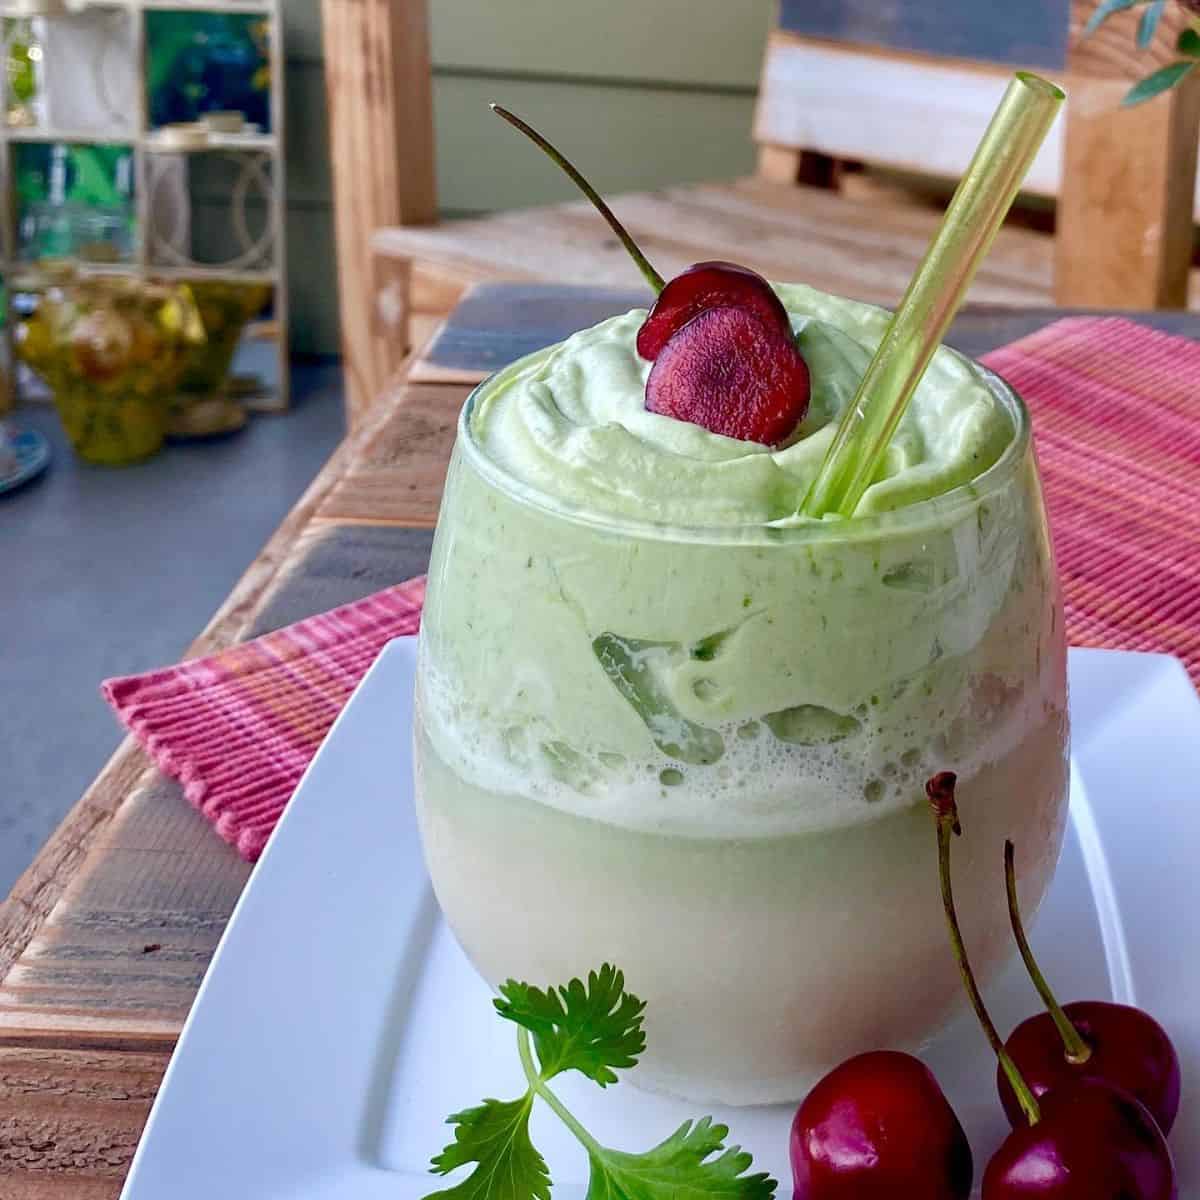 Luscious green creamy drink with cherries as toppings.